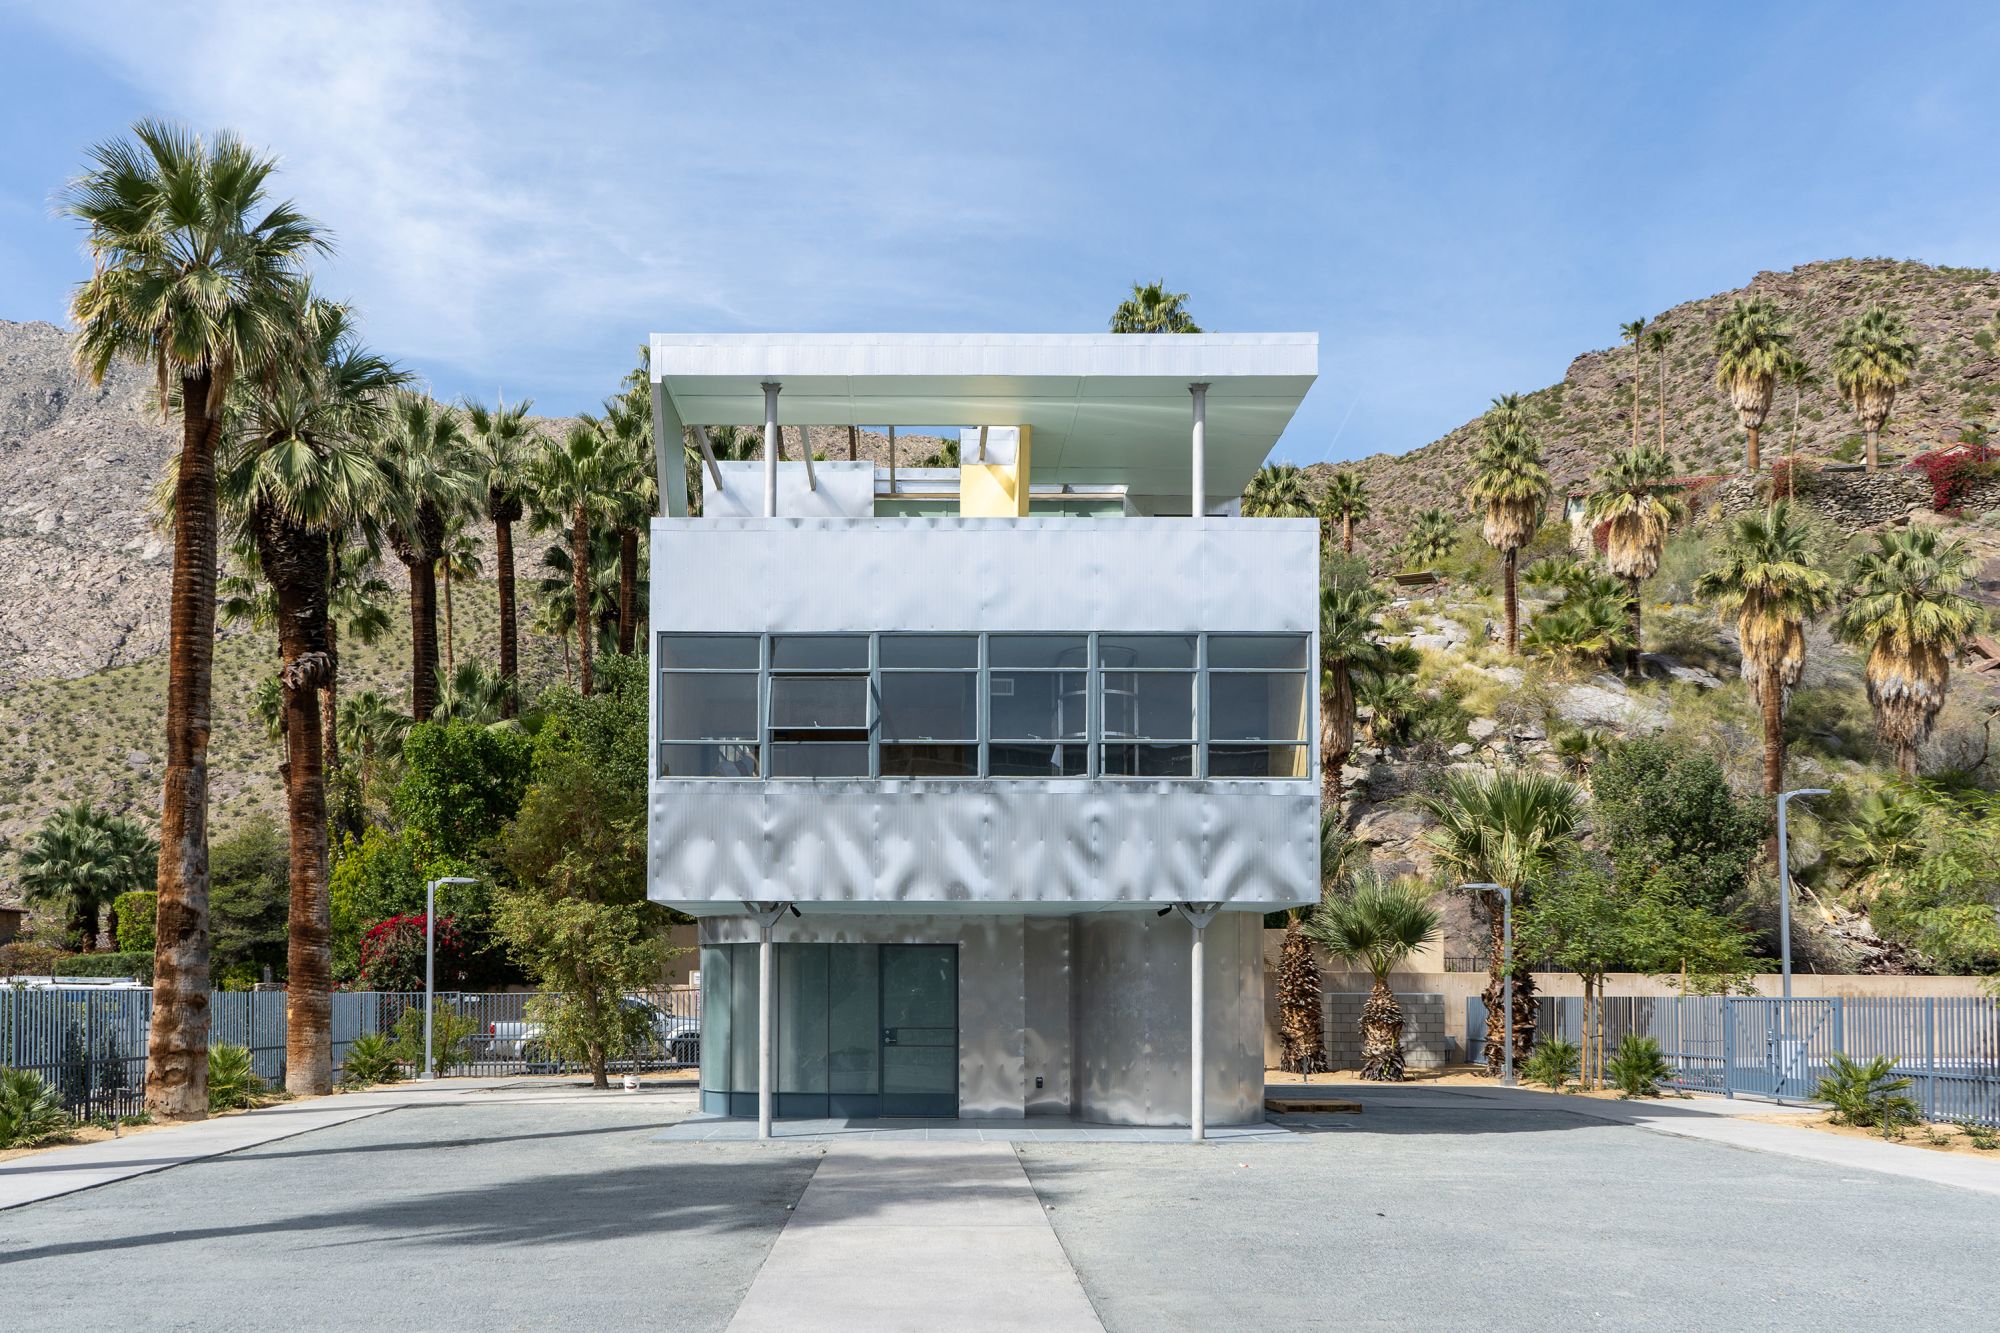 Albert Frey's famous "Aluminaire House" on display at the Palm Springs Art Museum. The diminutive house, now a shining new star in the galaxy of Palm Springs’s architectural gems, is pictured in its new location adjacent to the museum’s main building.